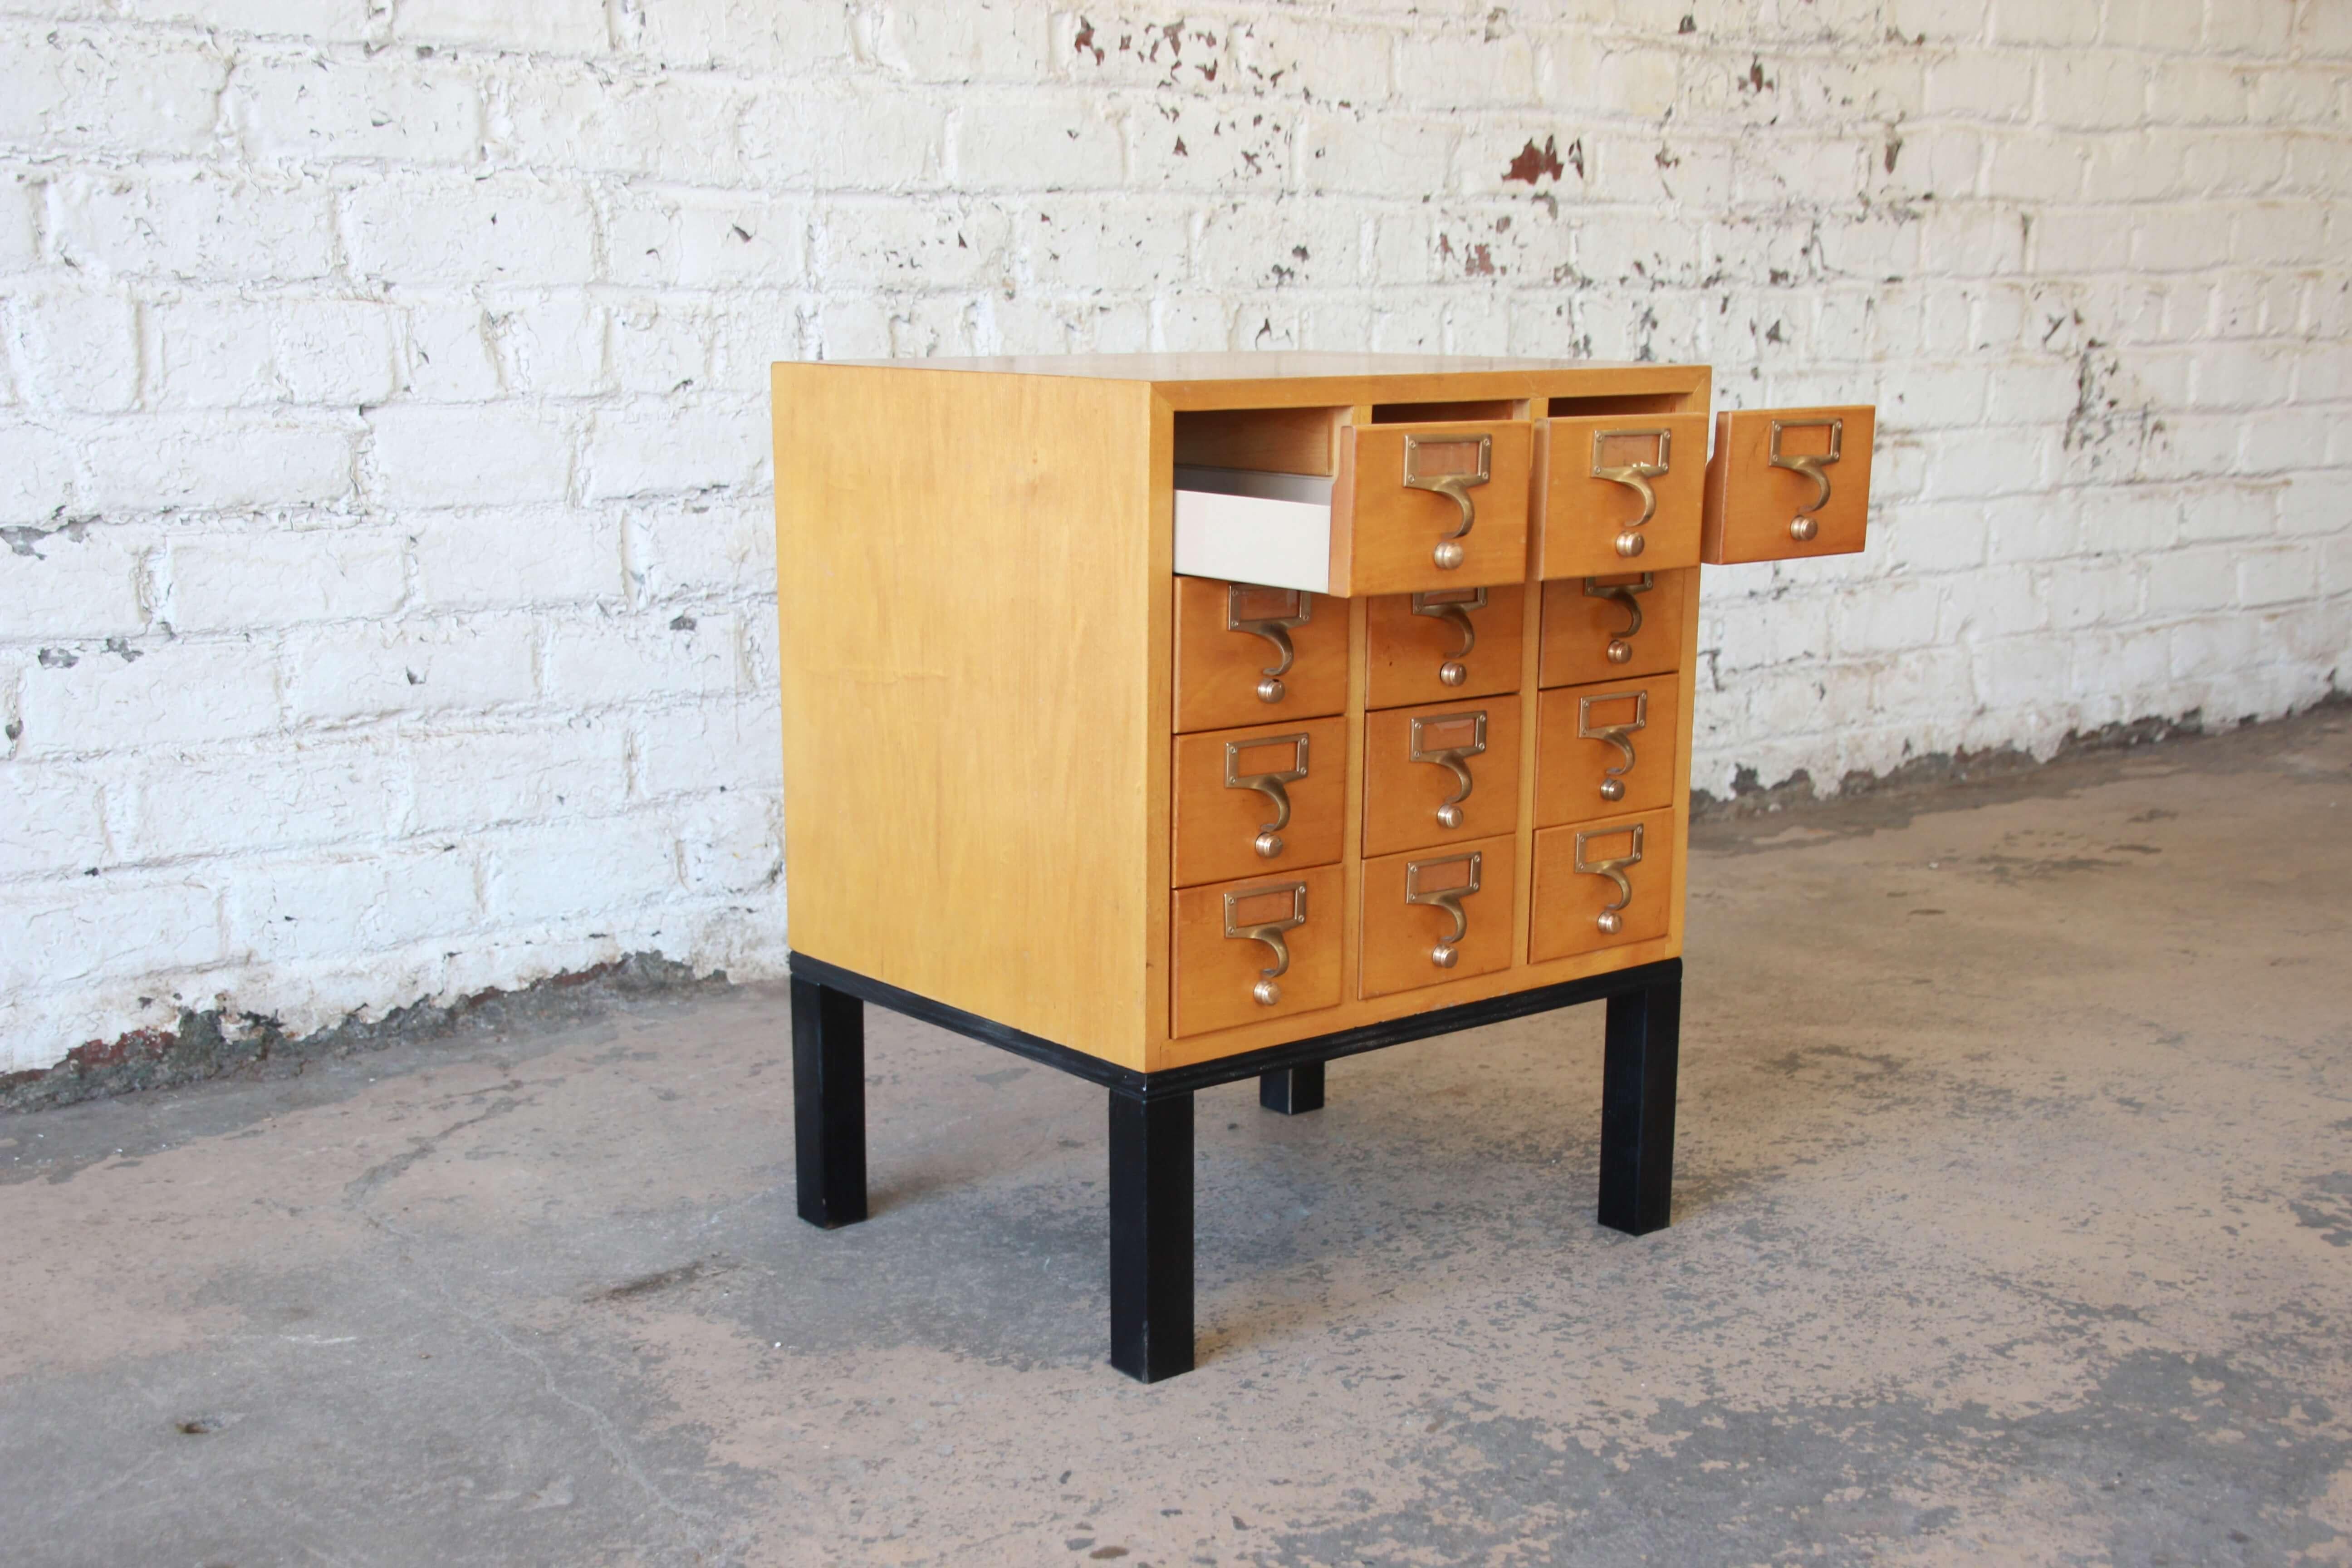 Mid-20th Century Vintage Twelve-Drawer Card Catalog End Table OR Nightstand by Garlord Bros